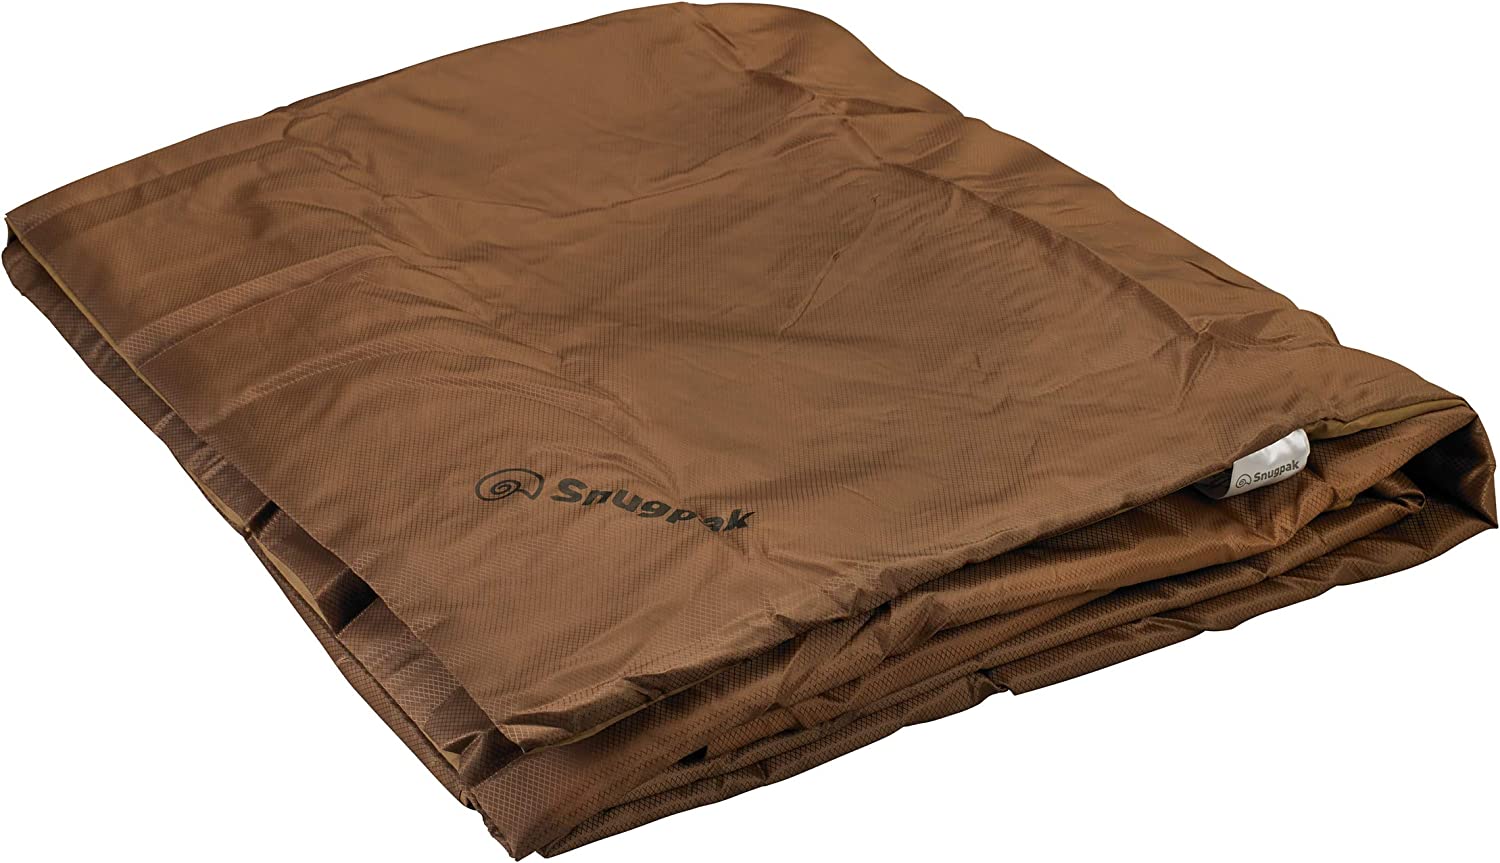 Snugpak Jungle Survival Blanket – Insulated, Lightweight, Water Repellent Polyester, Coyote